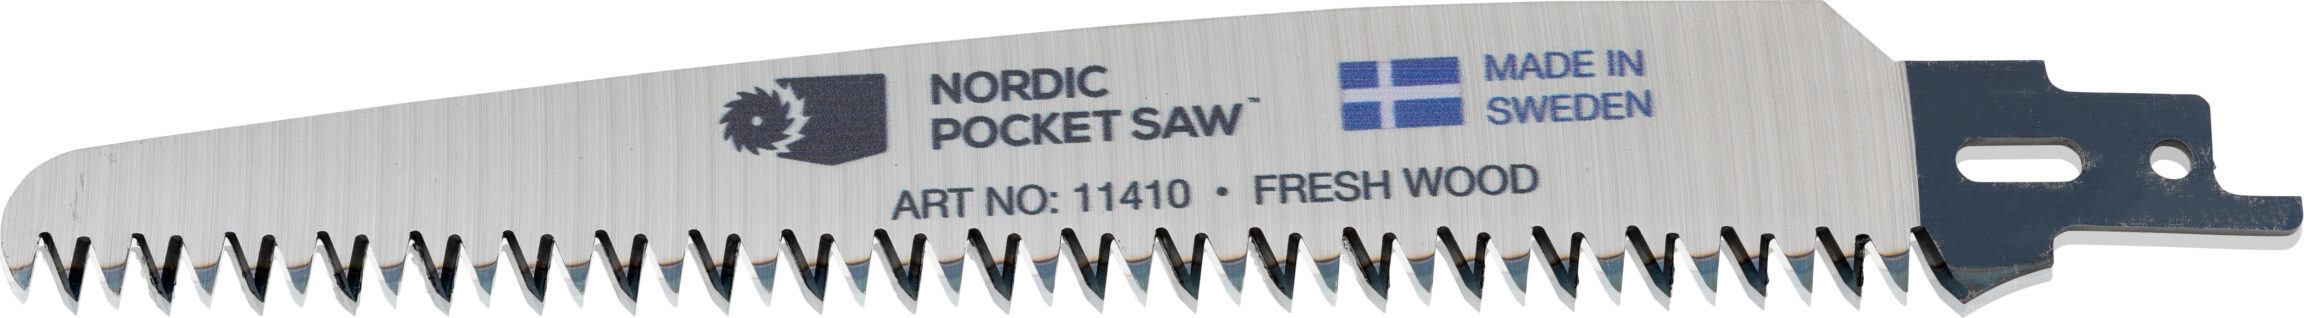 Nordic Pocket Saw Nordic Pocket Saw Extra Saw Blade For Fresh Wood Silver OneSize, Silver